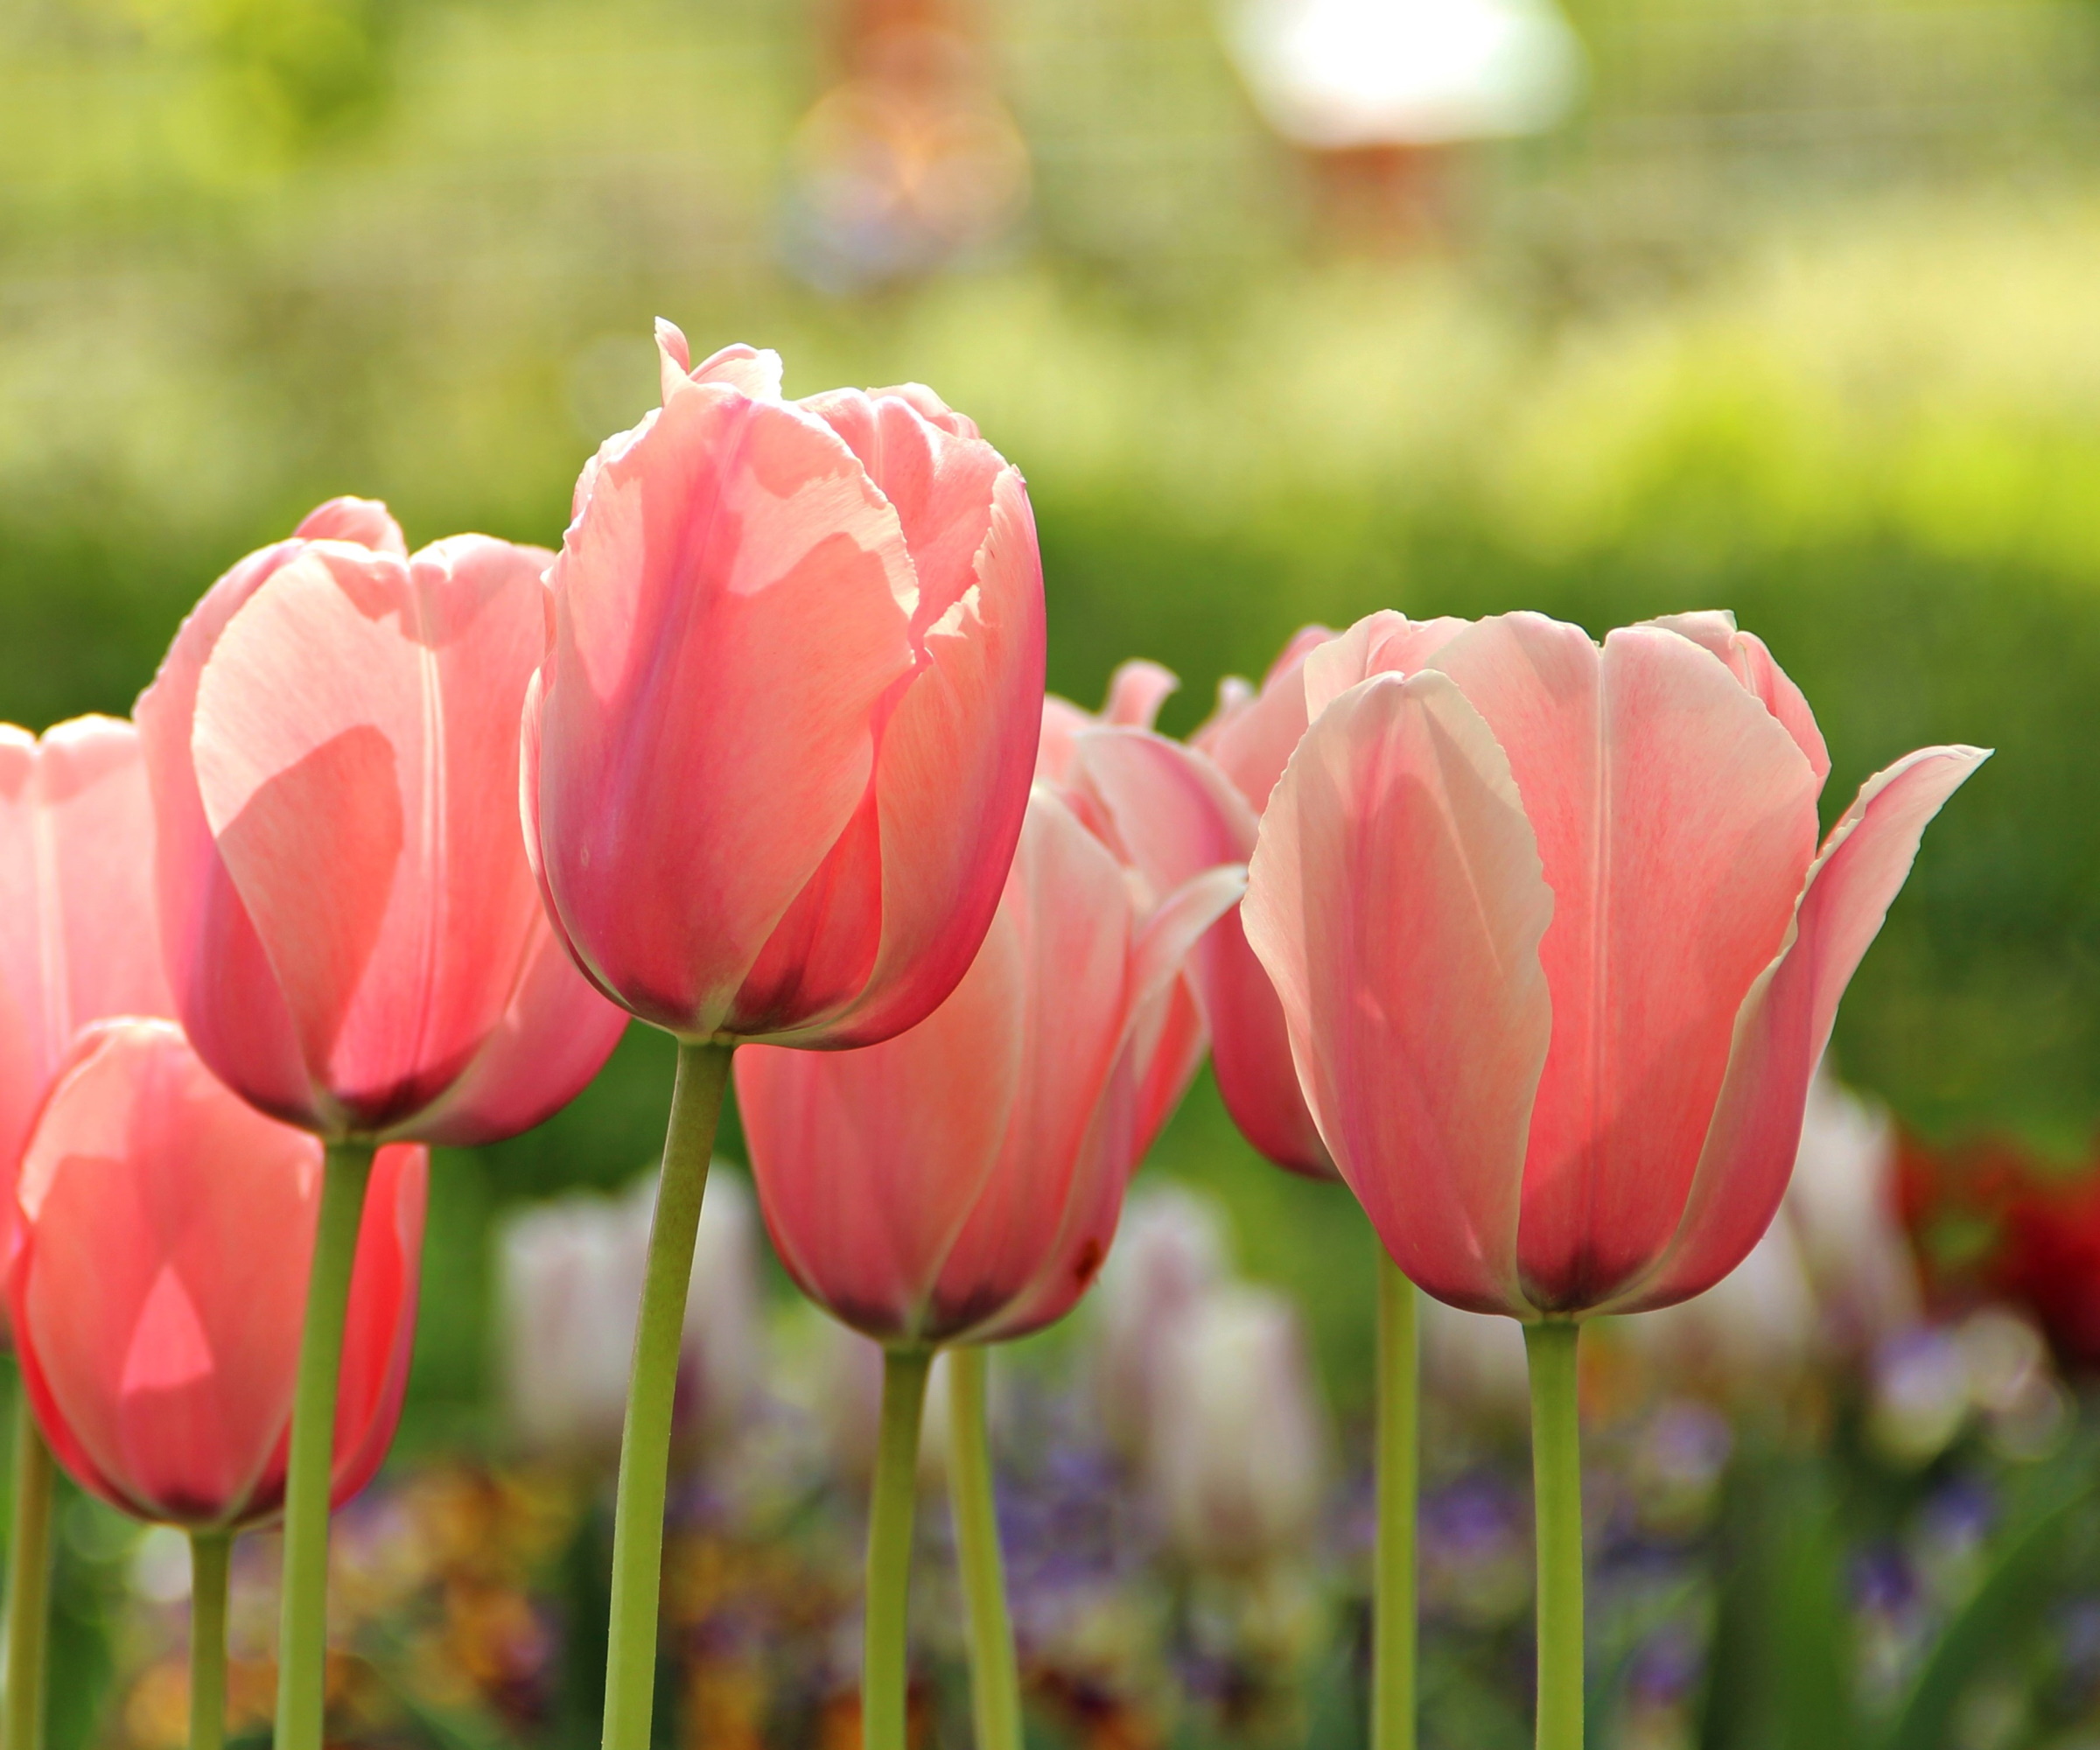 Peach and pink tulips in bloom